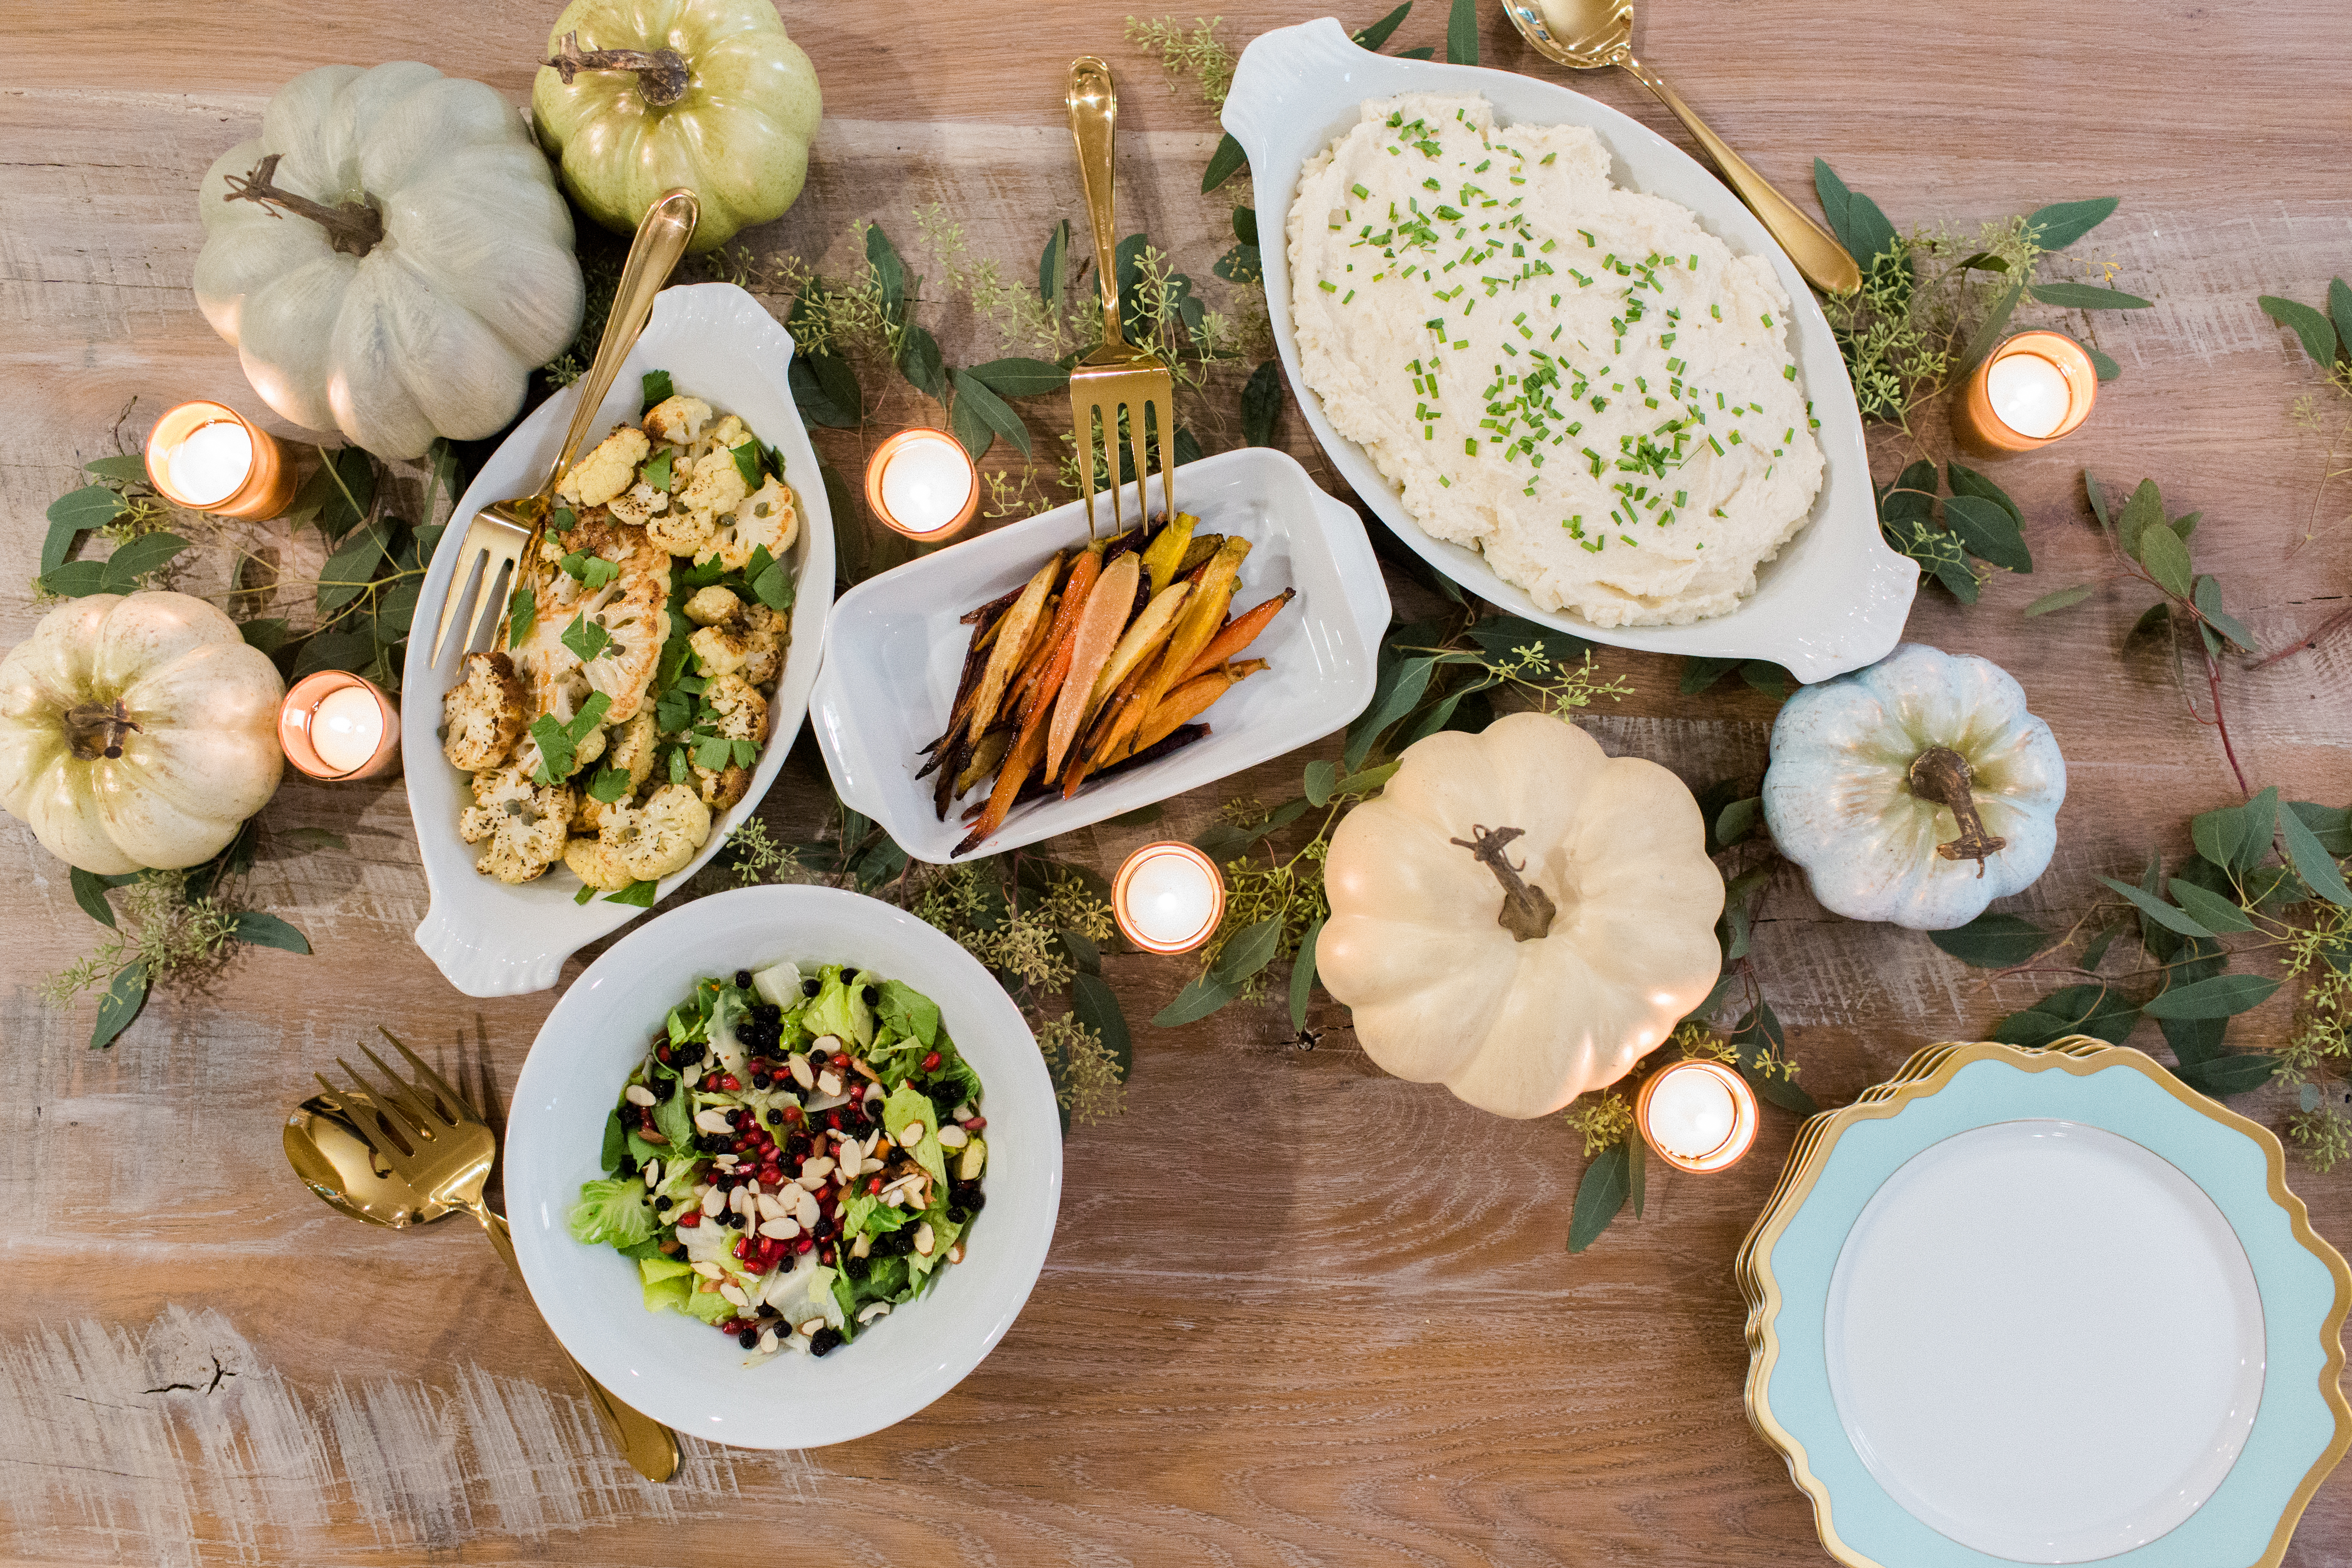 Alternative side dish recipes for Thanksgiving